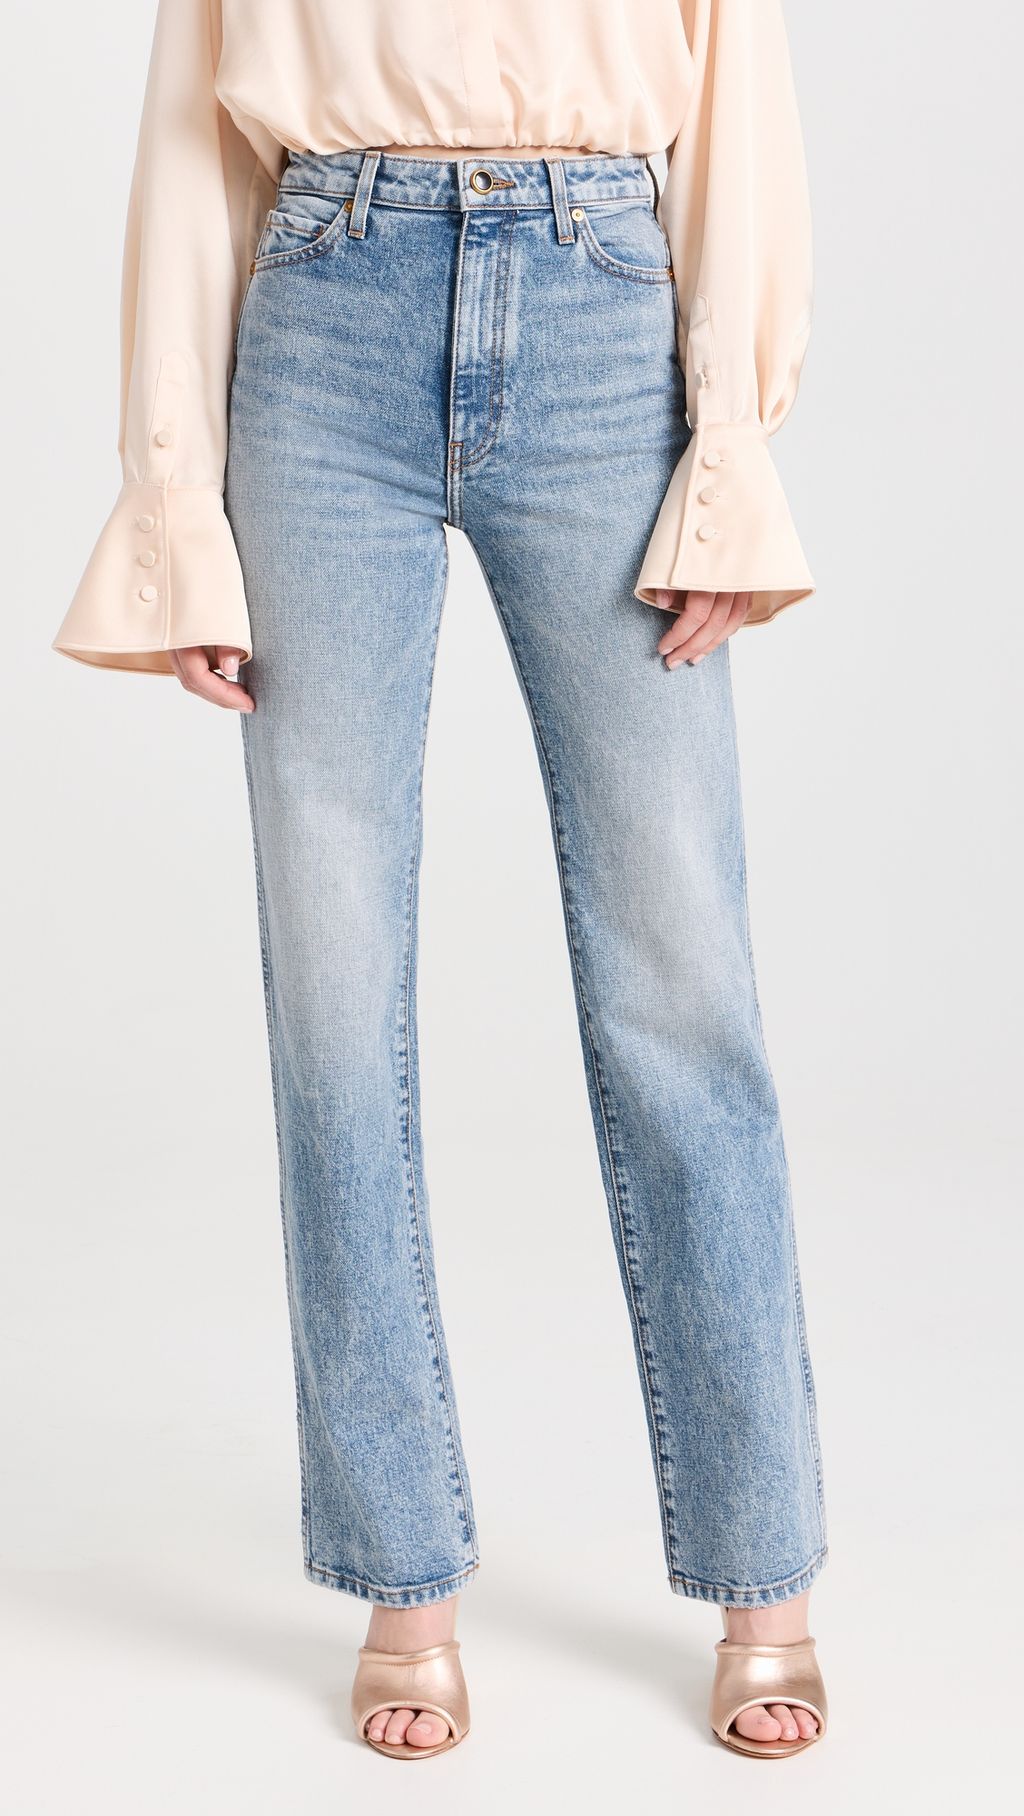 7 of the Best Pairs of Blue Jeans for Women | Who What Wear